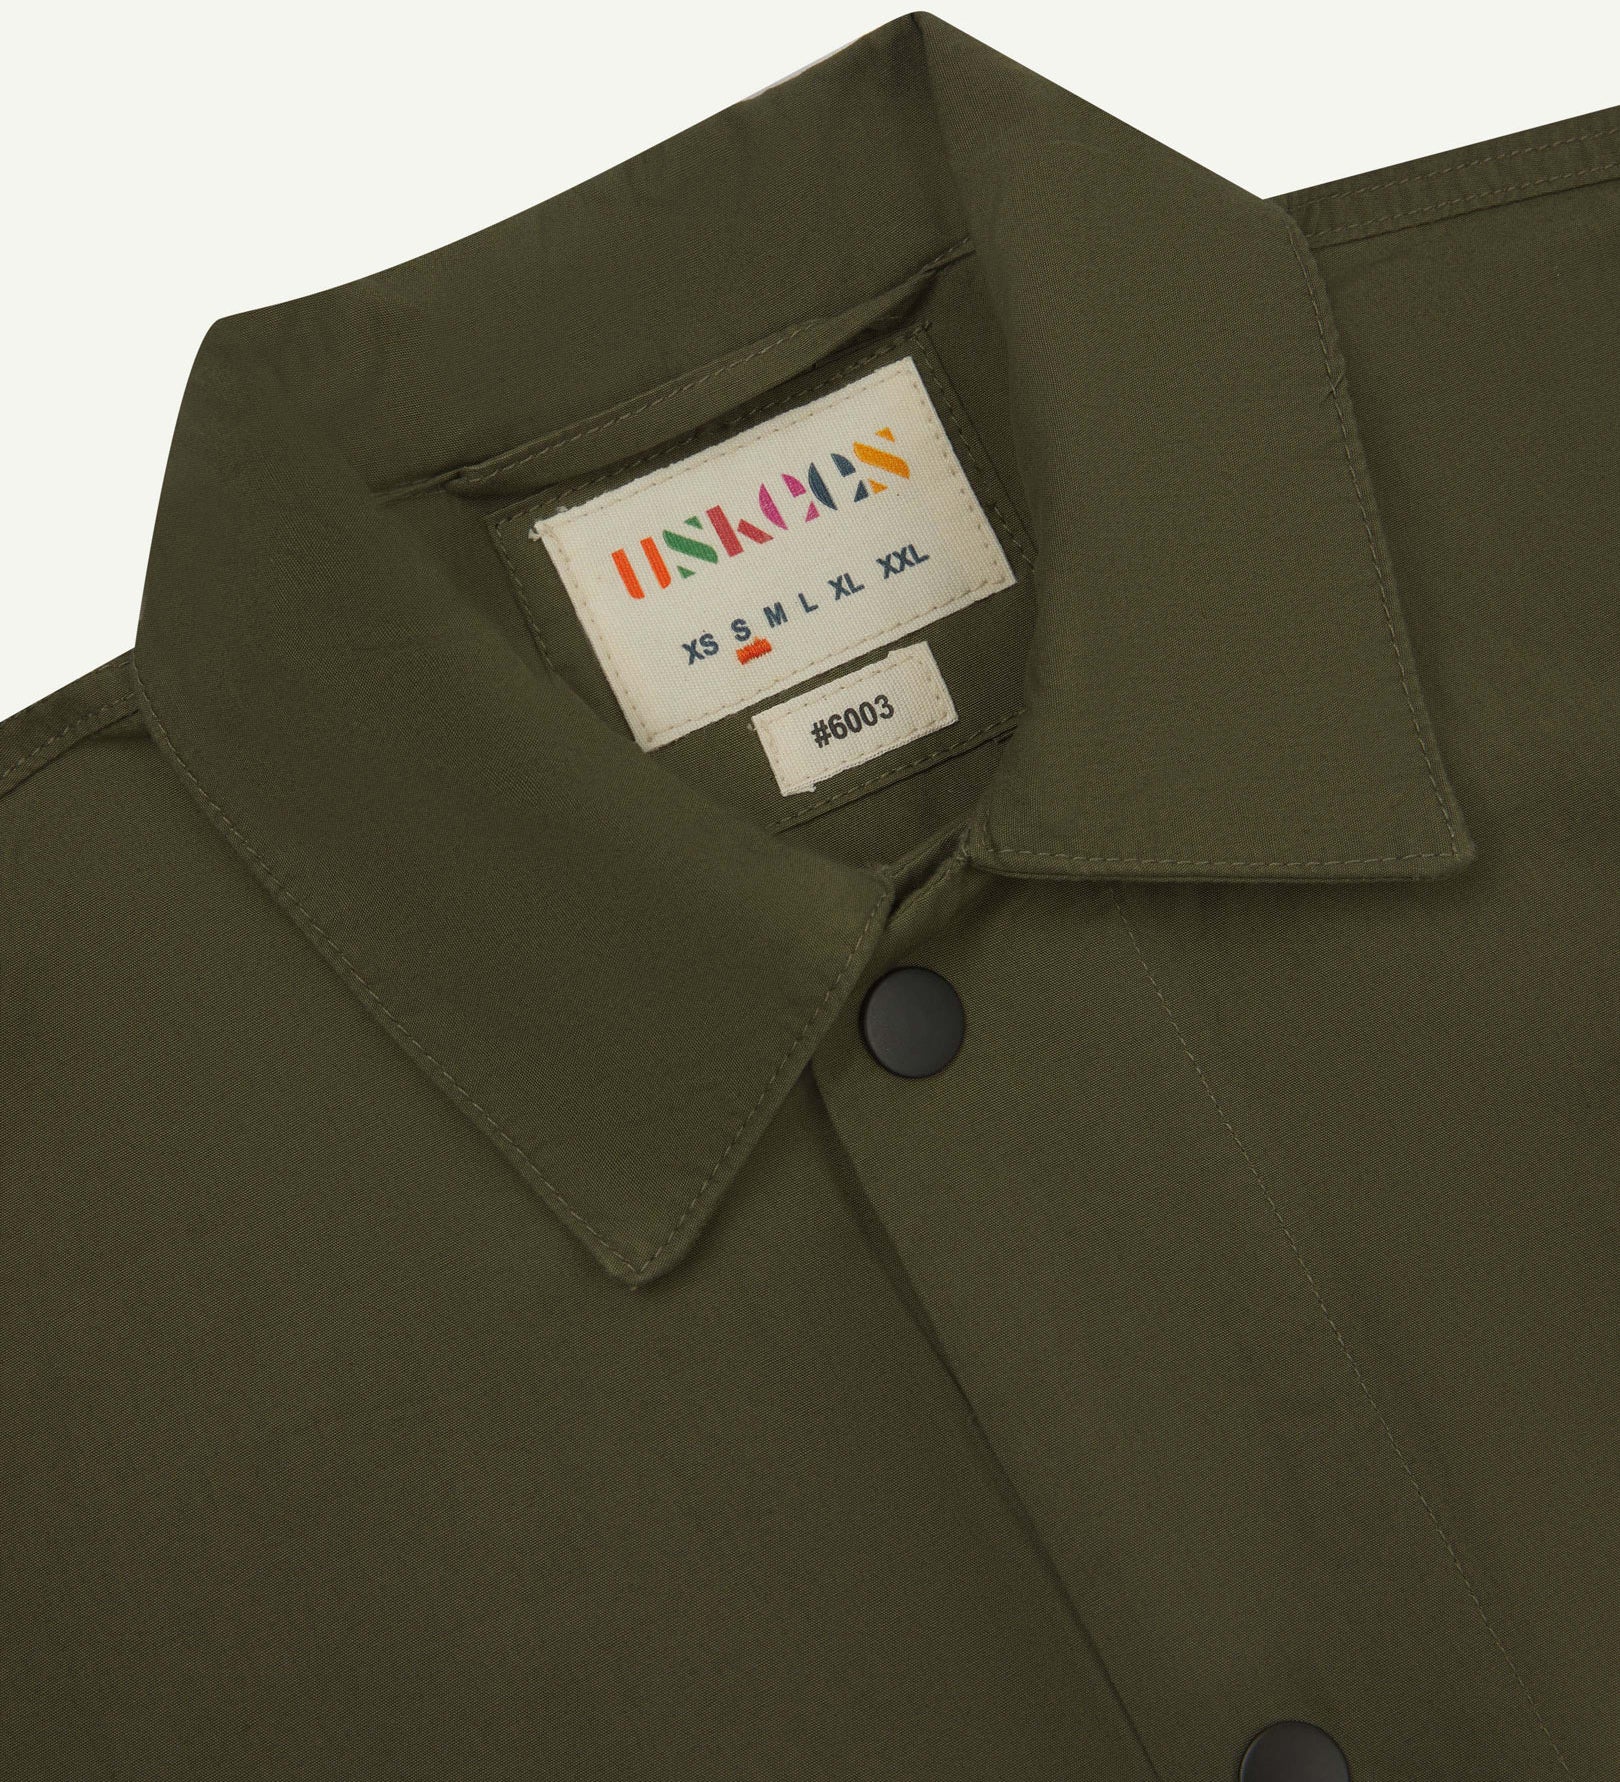 Close-up view of the #6003 reinforced shirt collar, showing weave of olive-green organic cotton, contrast press studs and Uskees branding label.